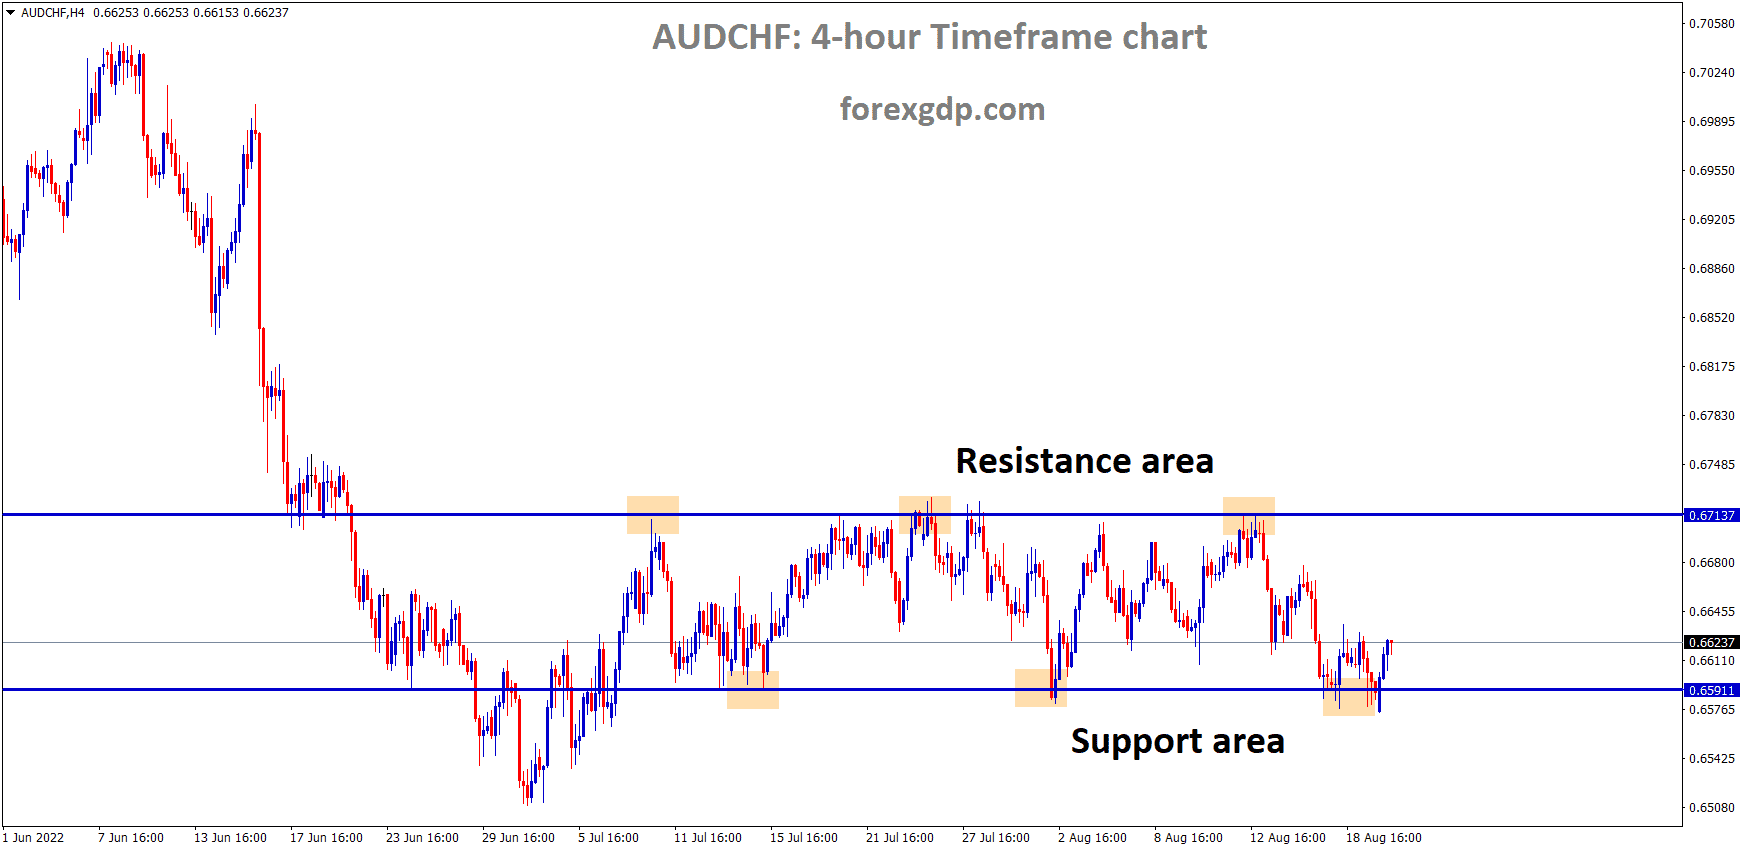 AUDCHF is moving in the Box Pattern and the Market has rebounded from the horizontal support area of the pattern 1